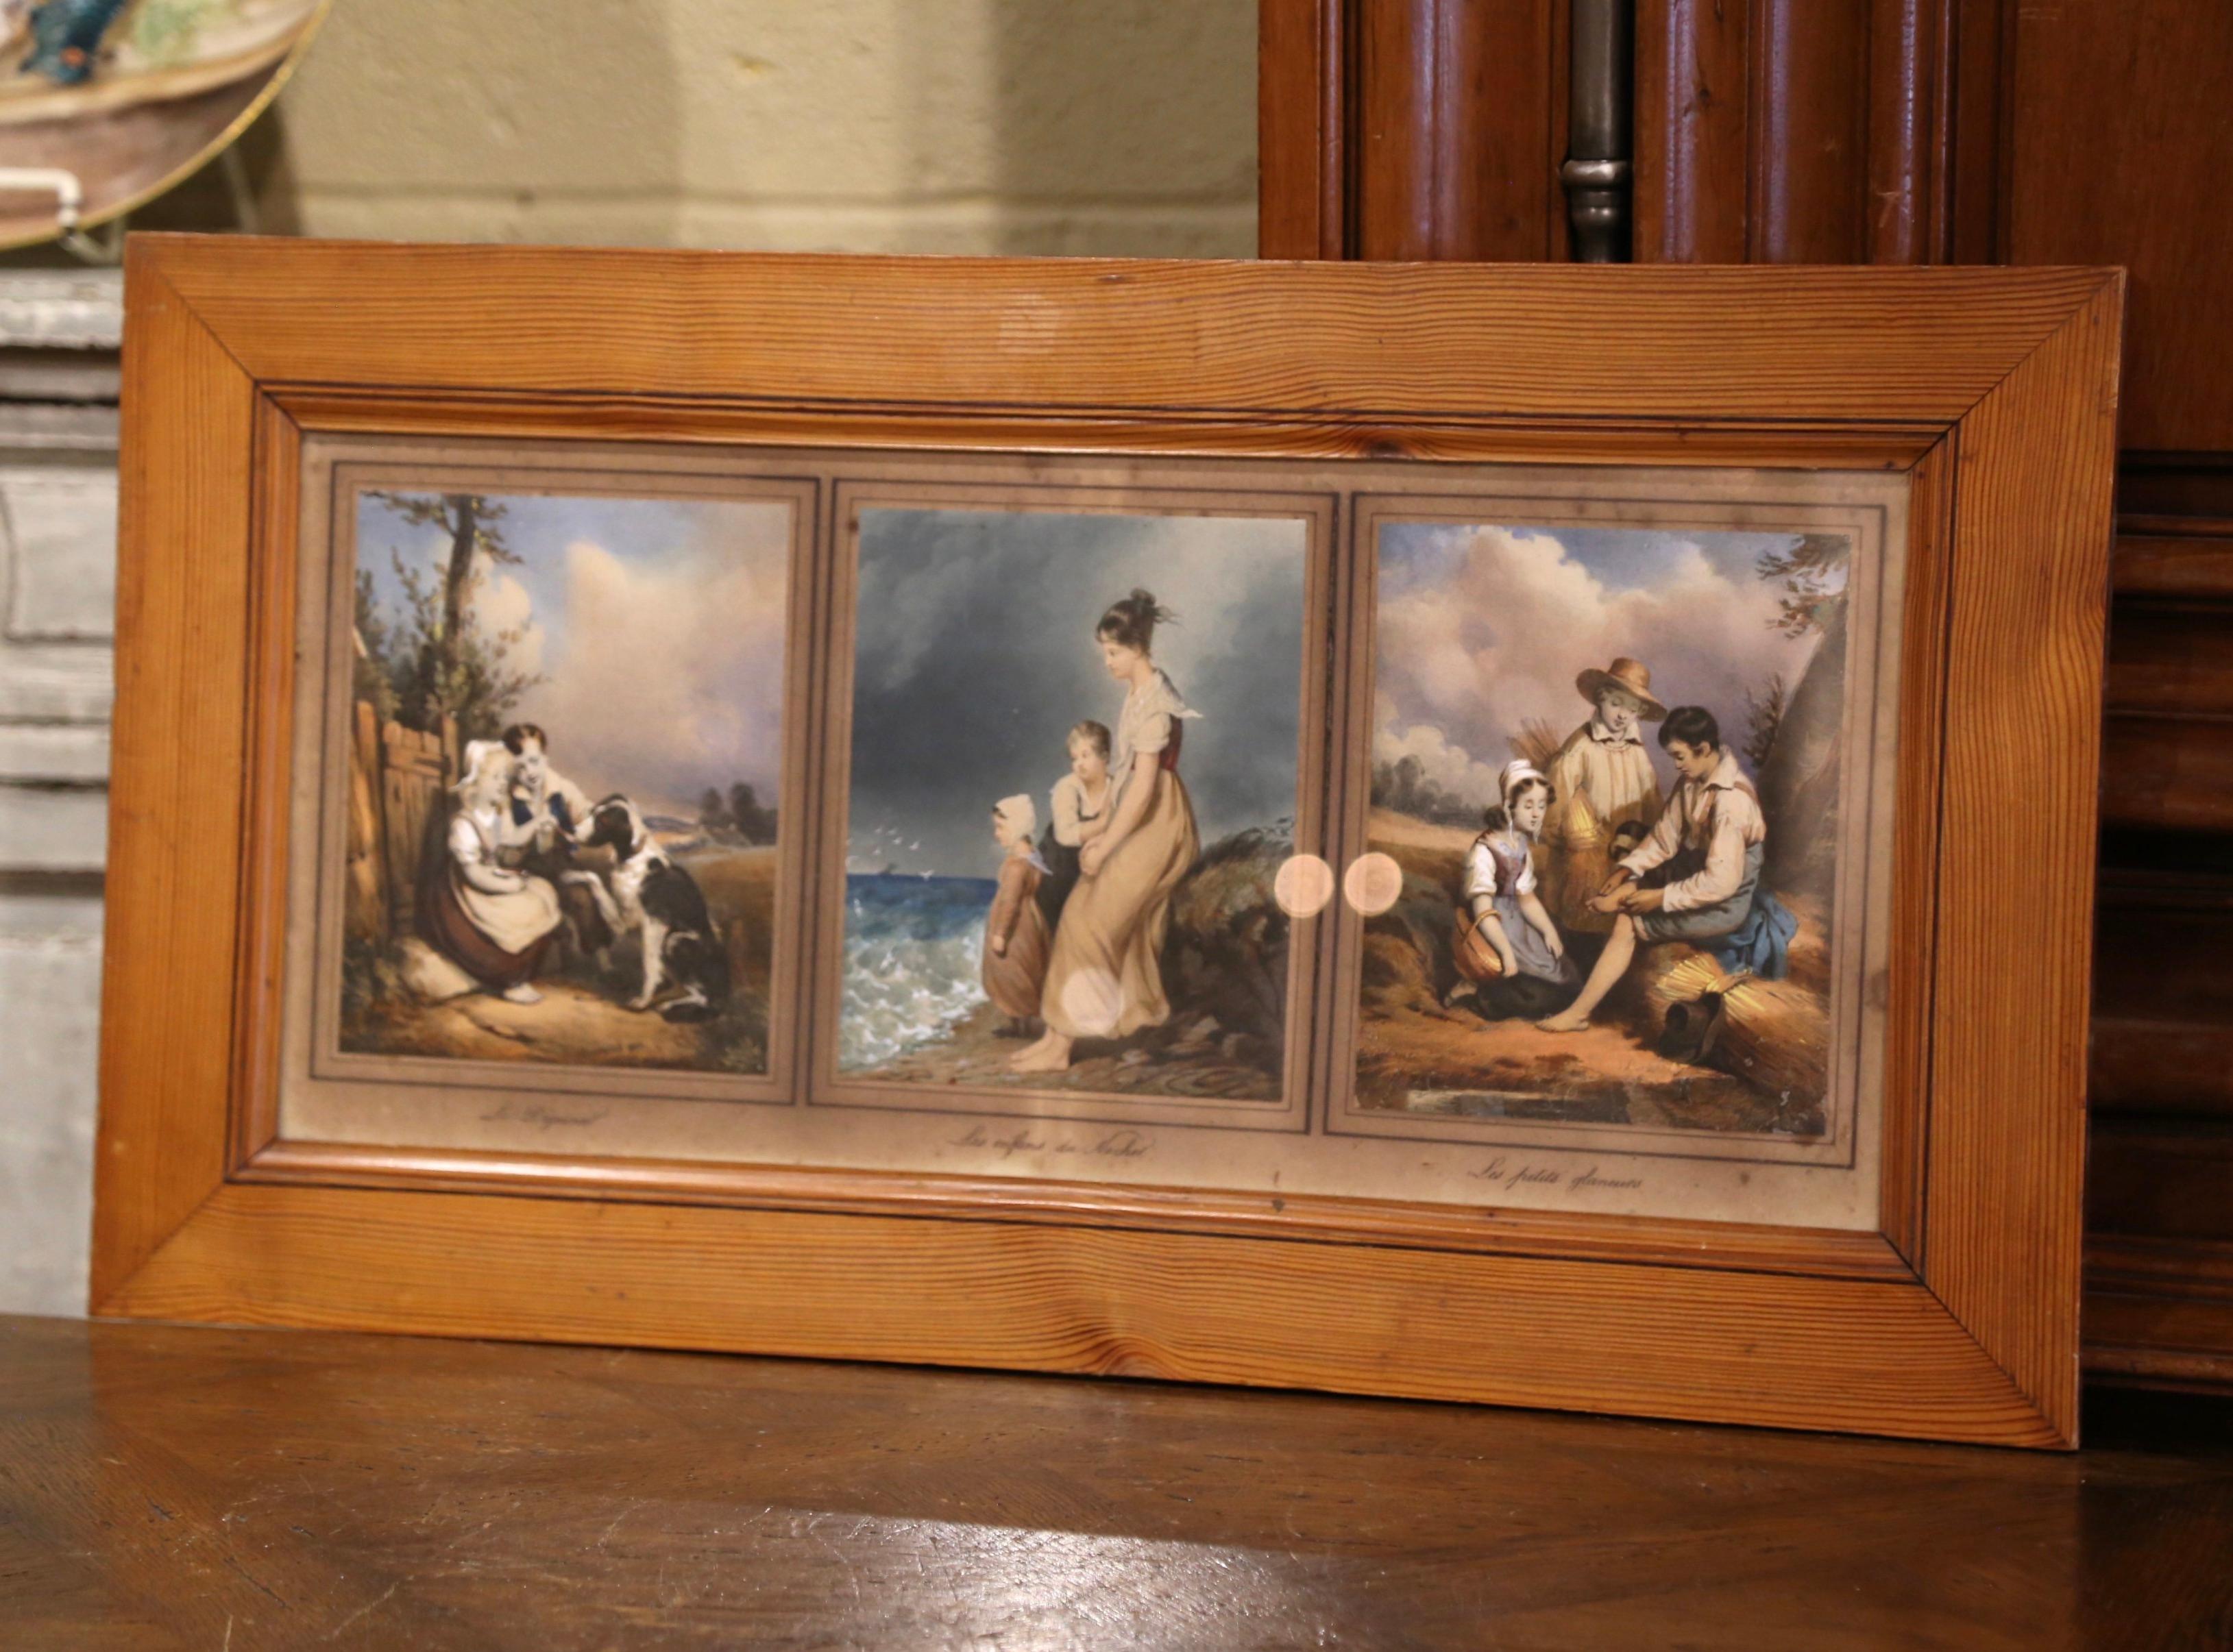 Decorate a bedroom or study with this charming antique framed watercolors. Crafted in France circa 1860 and set in a pine frame, the artwork features three hand painted watercolors protected with glass. Titled 